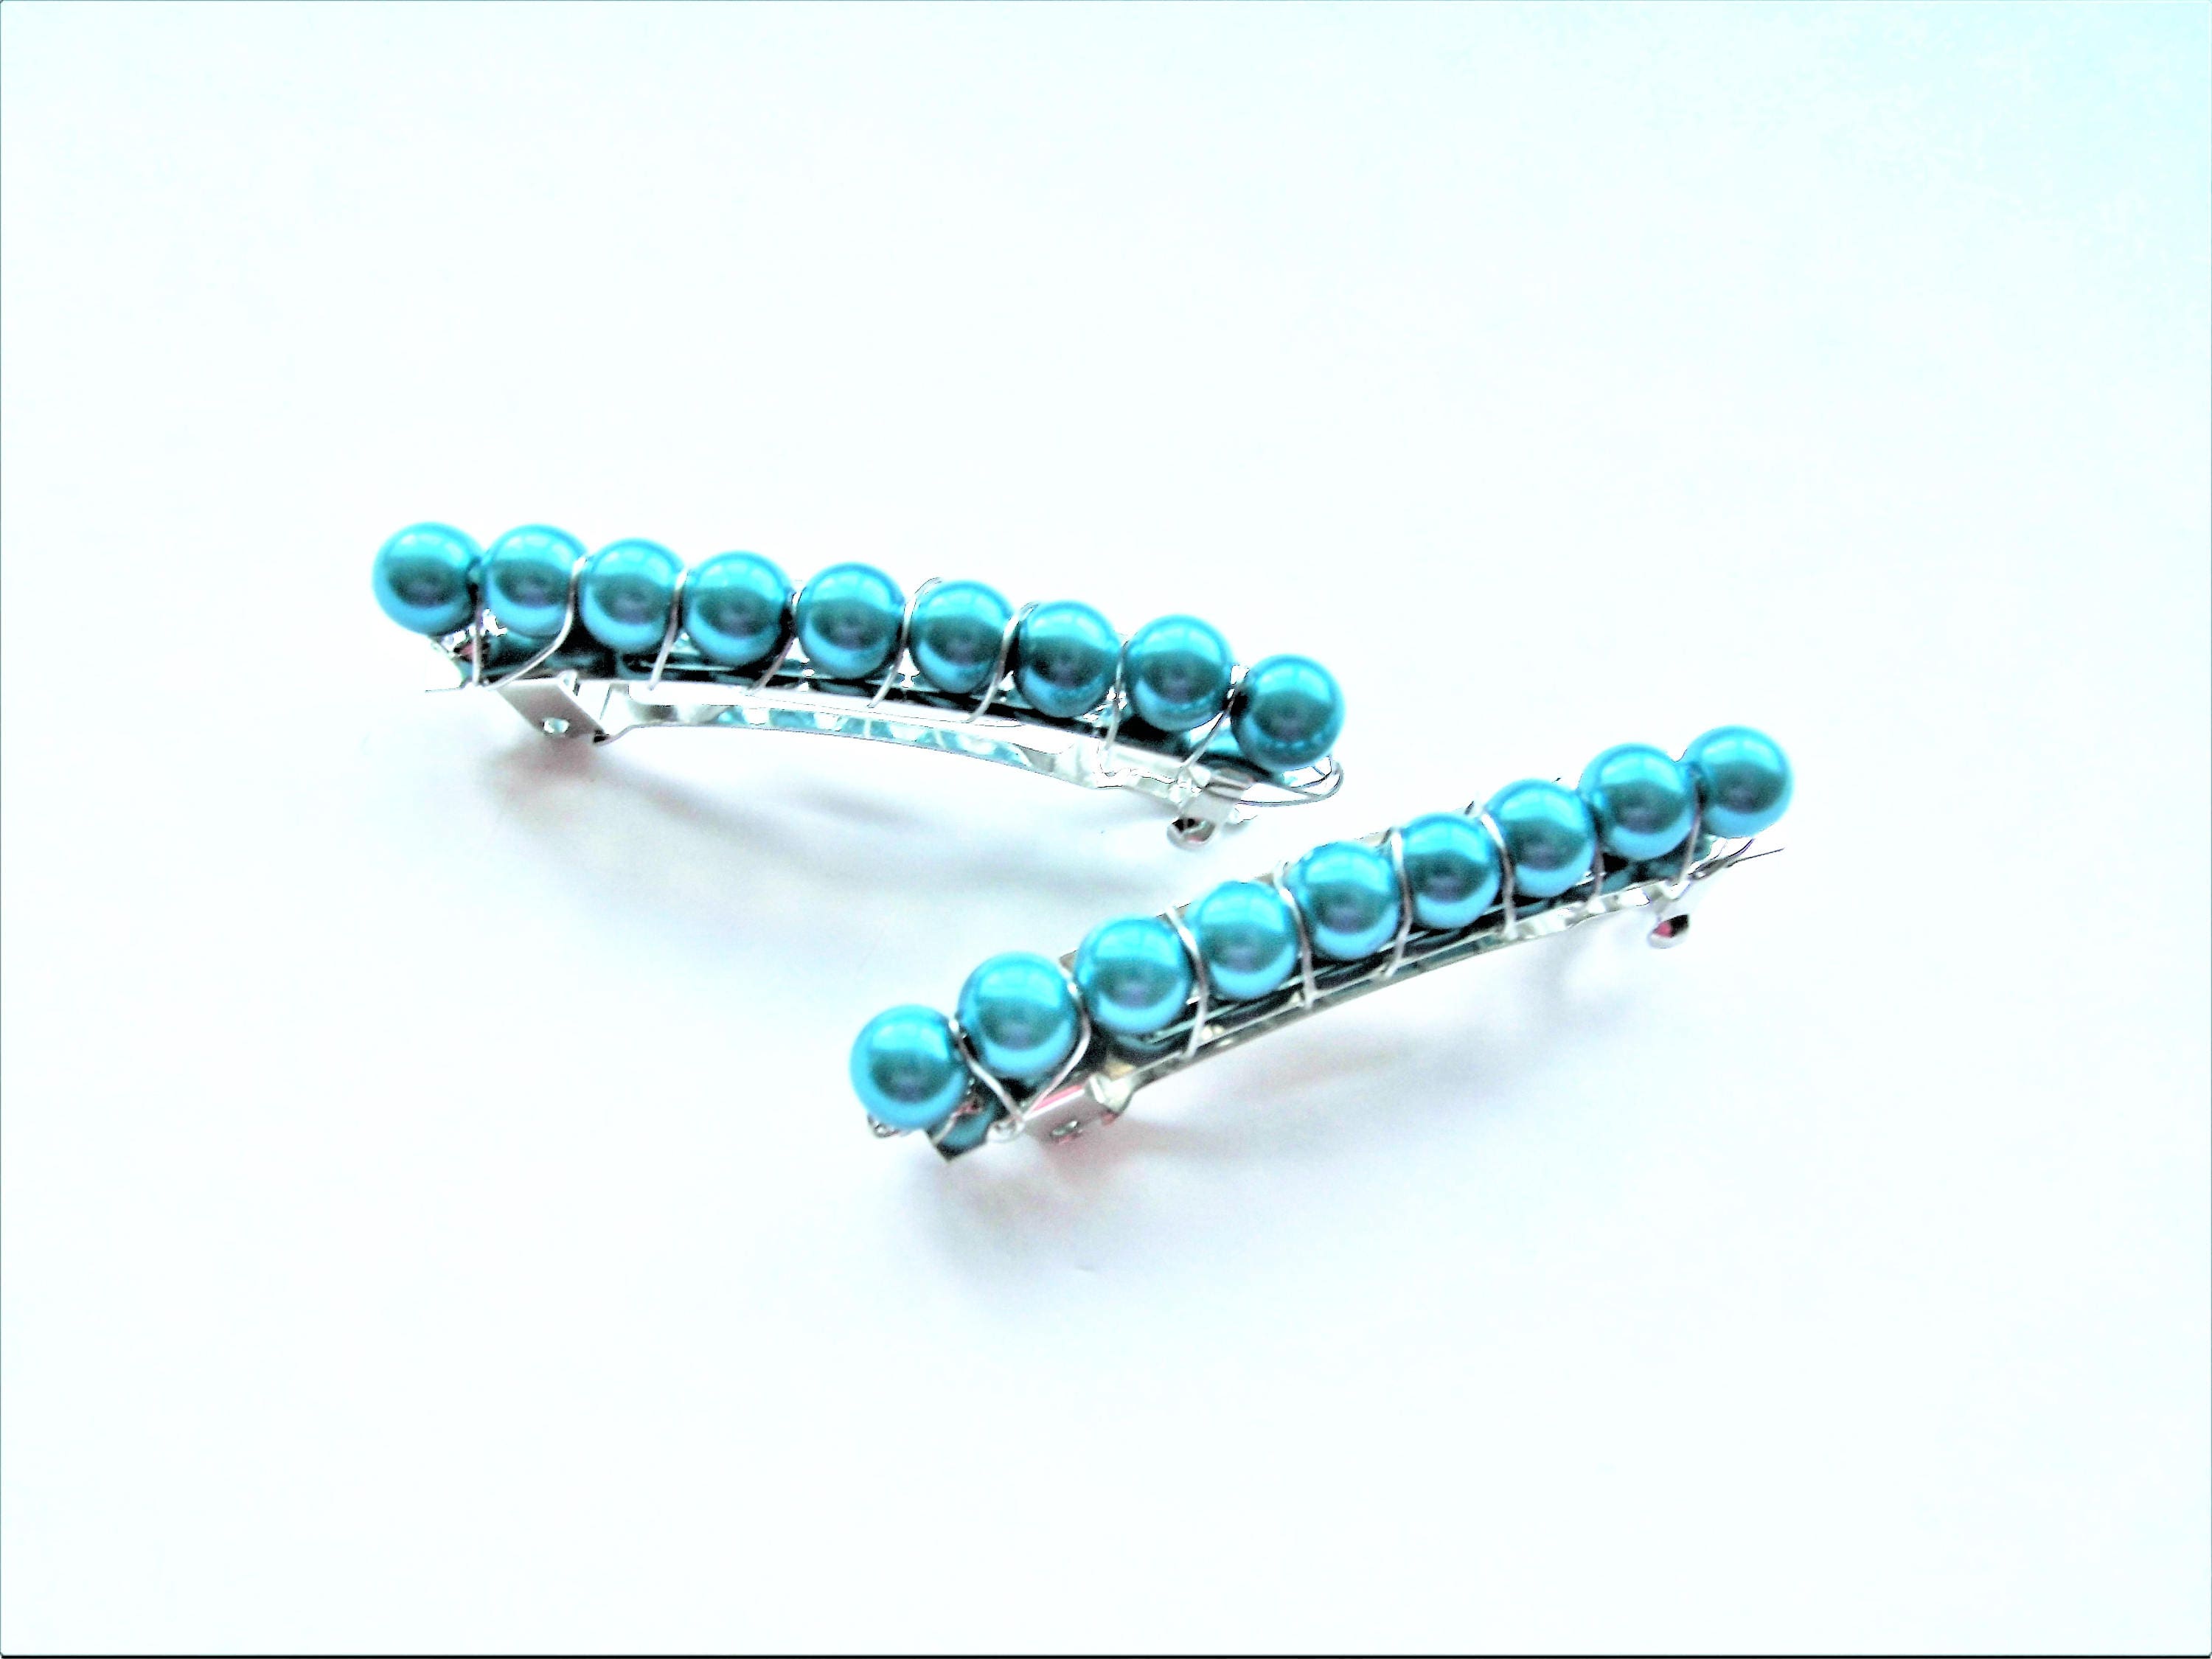 Barrettes with Blue Crystals - wide 3